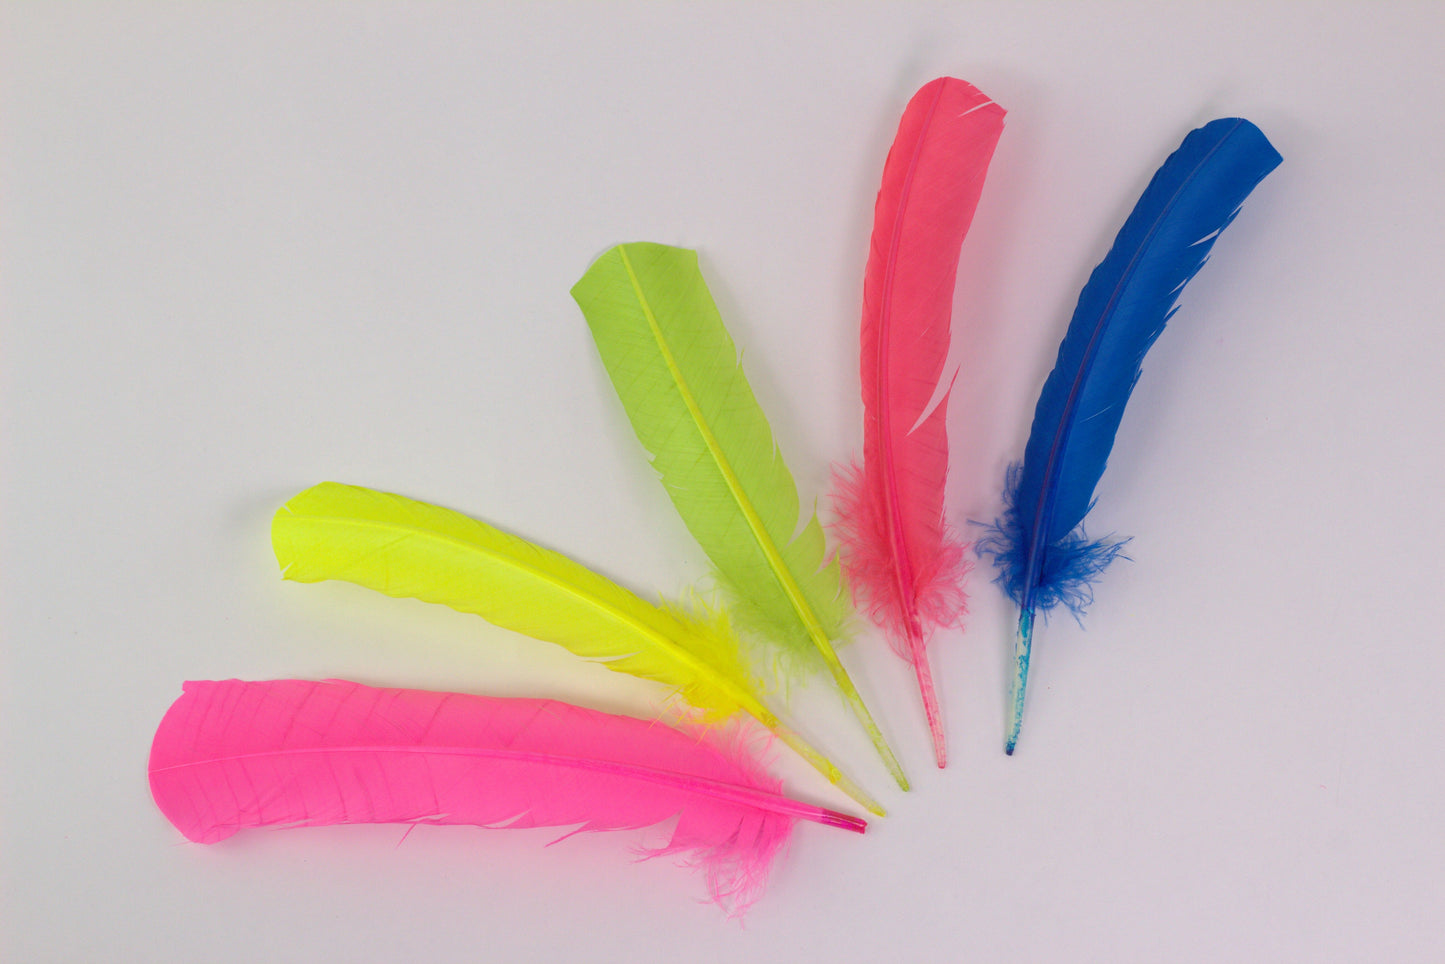 15 PCS Turkey quills Mix Dyed Feathers 10-12" - Neon